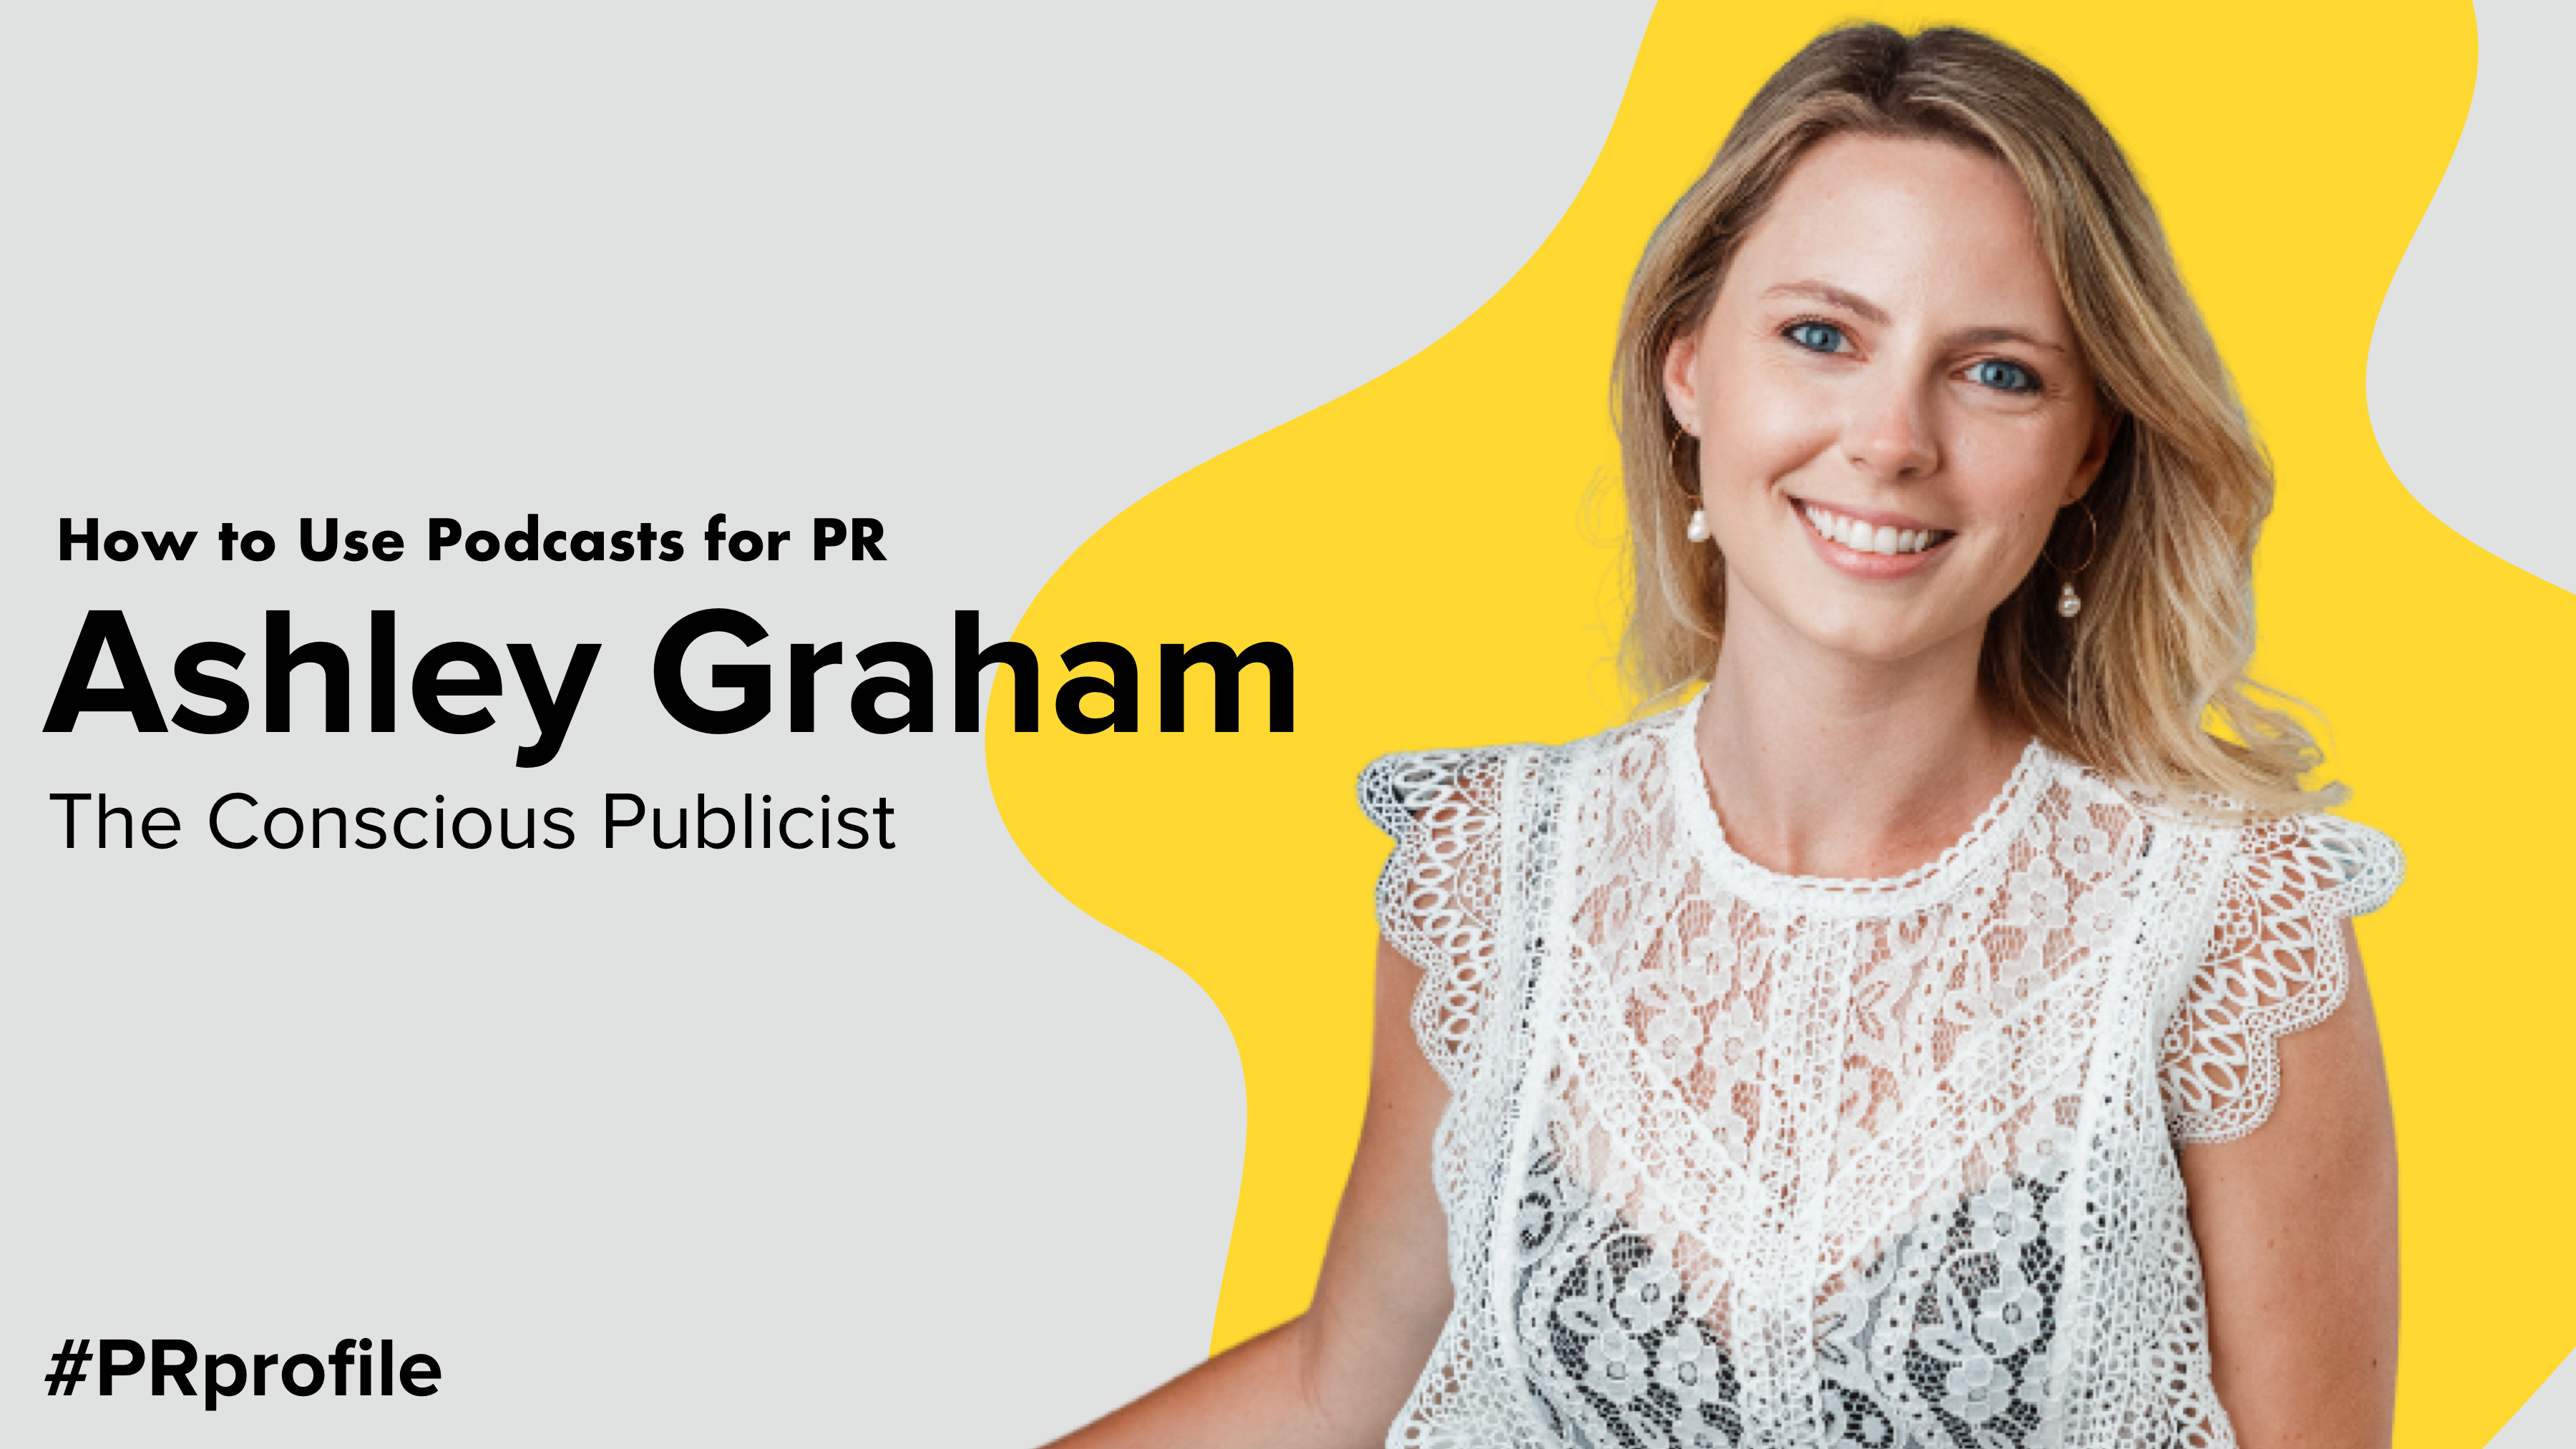 How to Use Podcasts for PR with Ashley Graham